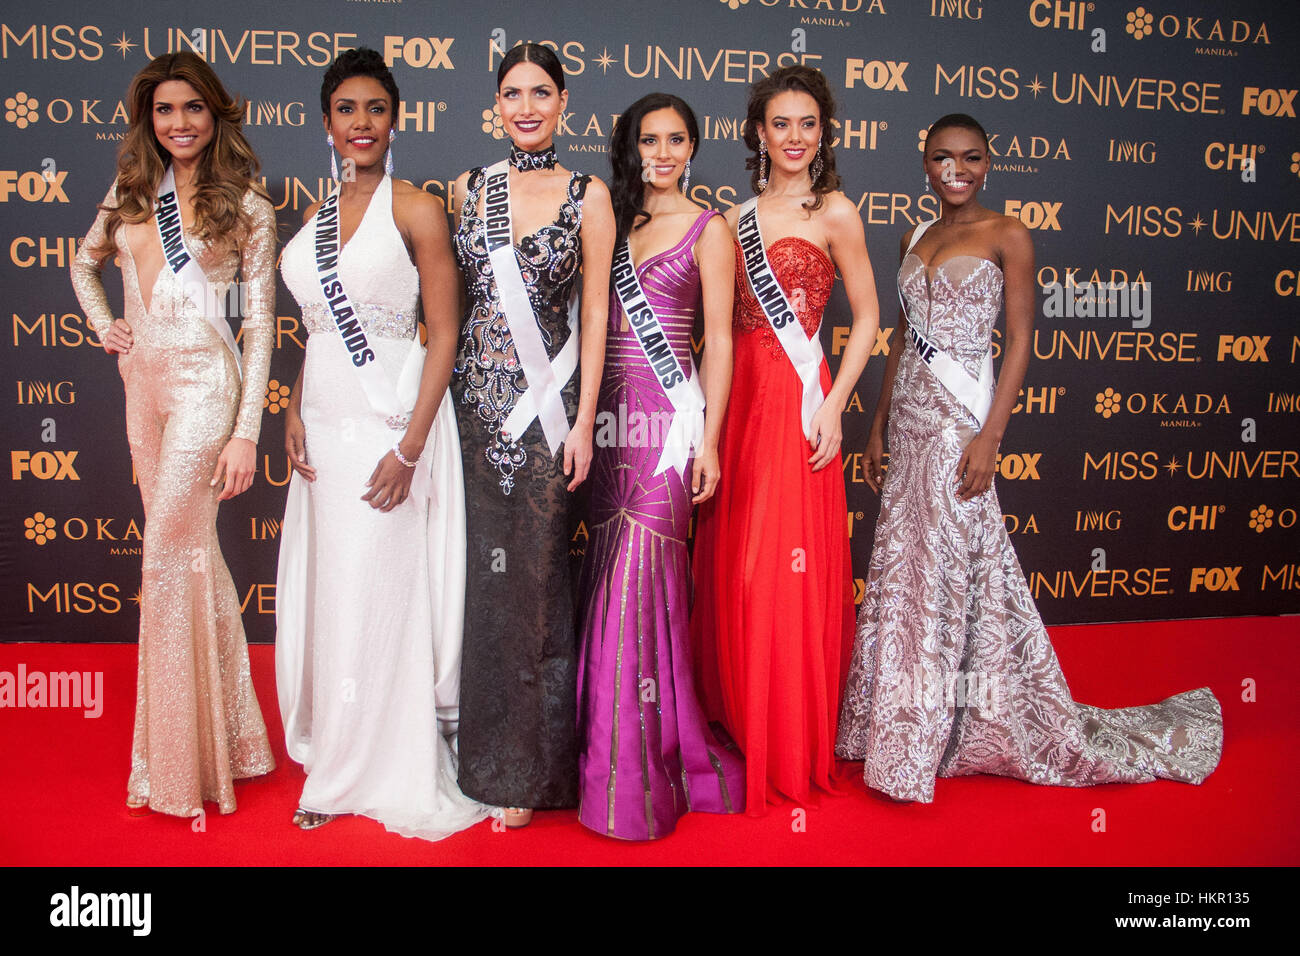 Pasay, Philippines. 29th Jan, 2017. Miss Panama, Miss Cayman Islands, Miss Georgia, Miss U.S. Virgin Islands, Miss Netherlands, and Miss Sierra Leone pose for a photo at the SMX in Pasay CIty. Miss Universe candidates walked the red carpet at the SMX in Pasay City a day before the coronation. Credit: J Gerard Seguia/Pacific Press/Alamy Live News Stock Photo